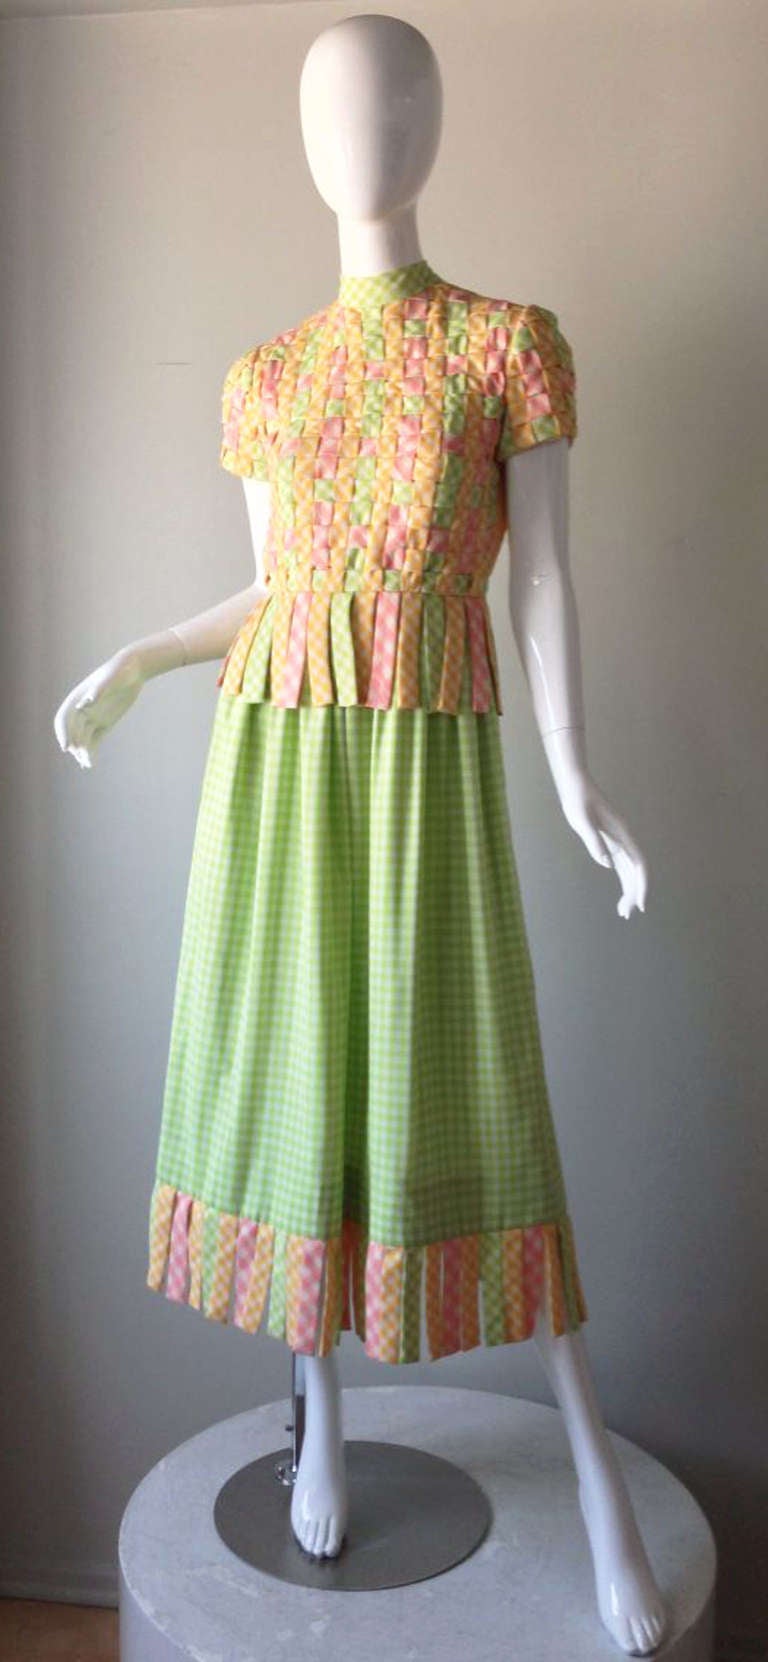 A fine and rare vintage Donald Brooks braided gingham dress. Charming alternating yellow, pink and green cotton gingham fabric woven to create bodice front and short sleeves. Matching 